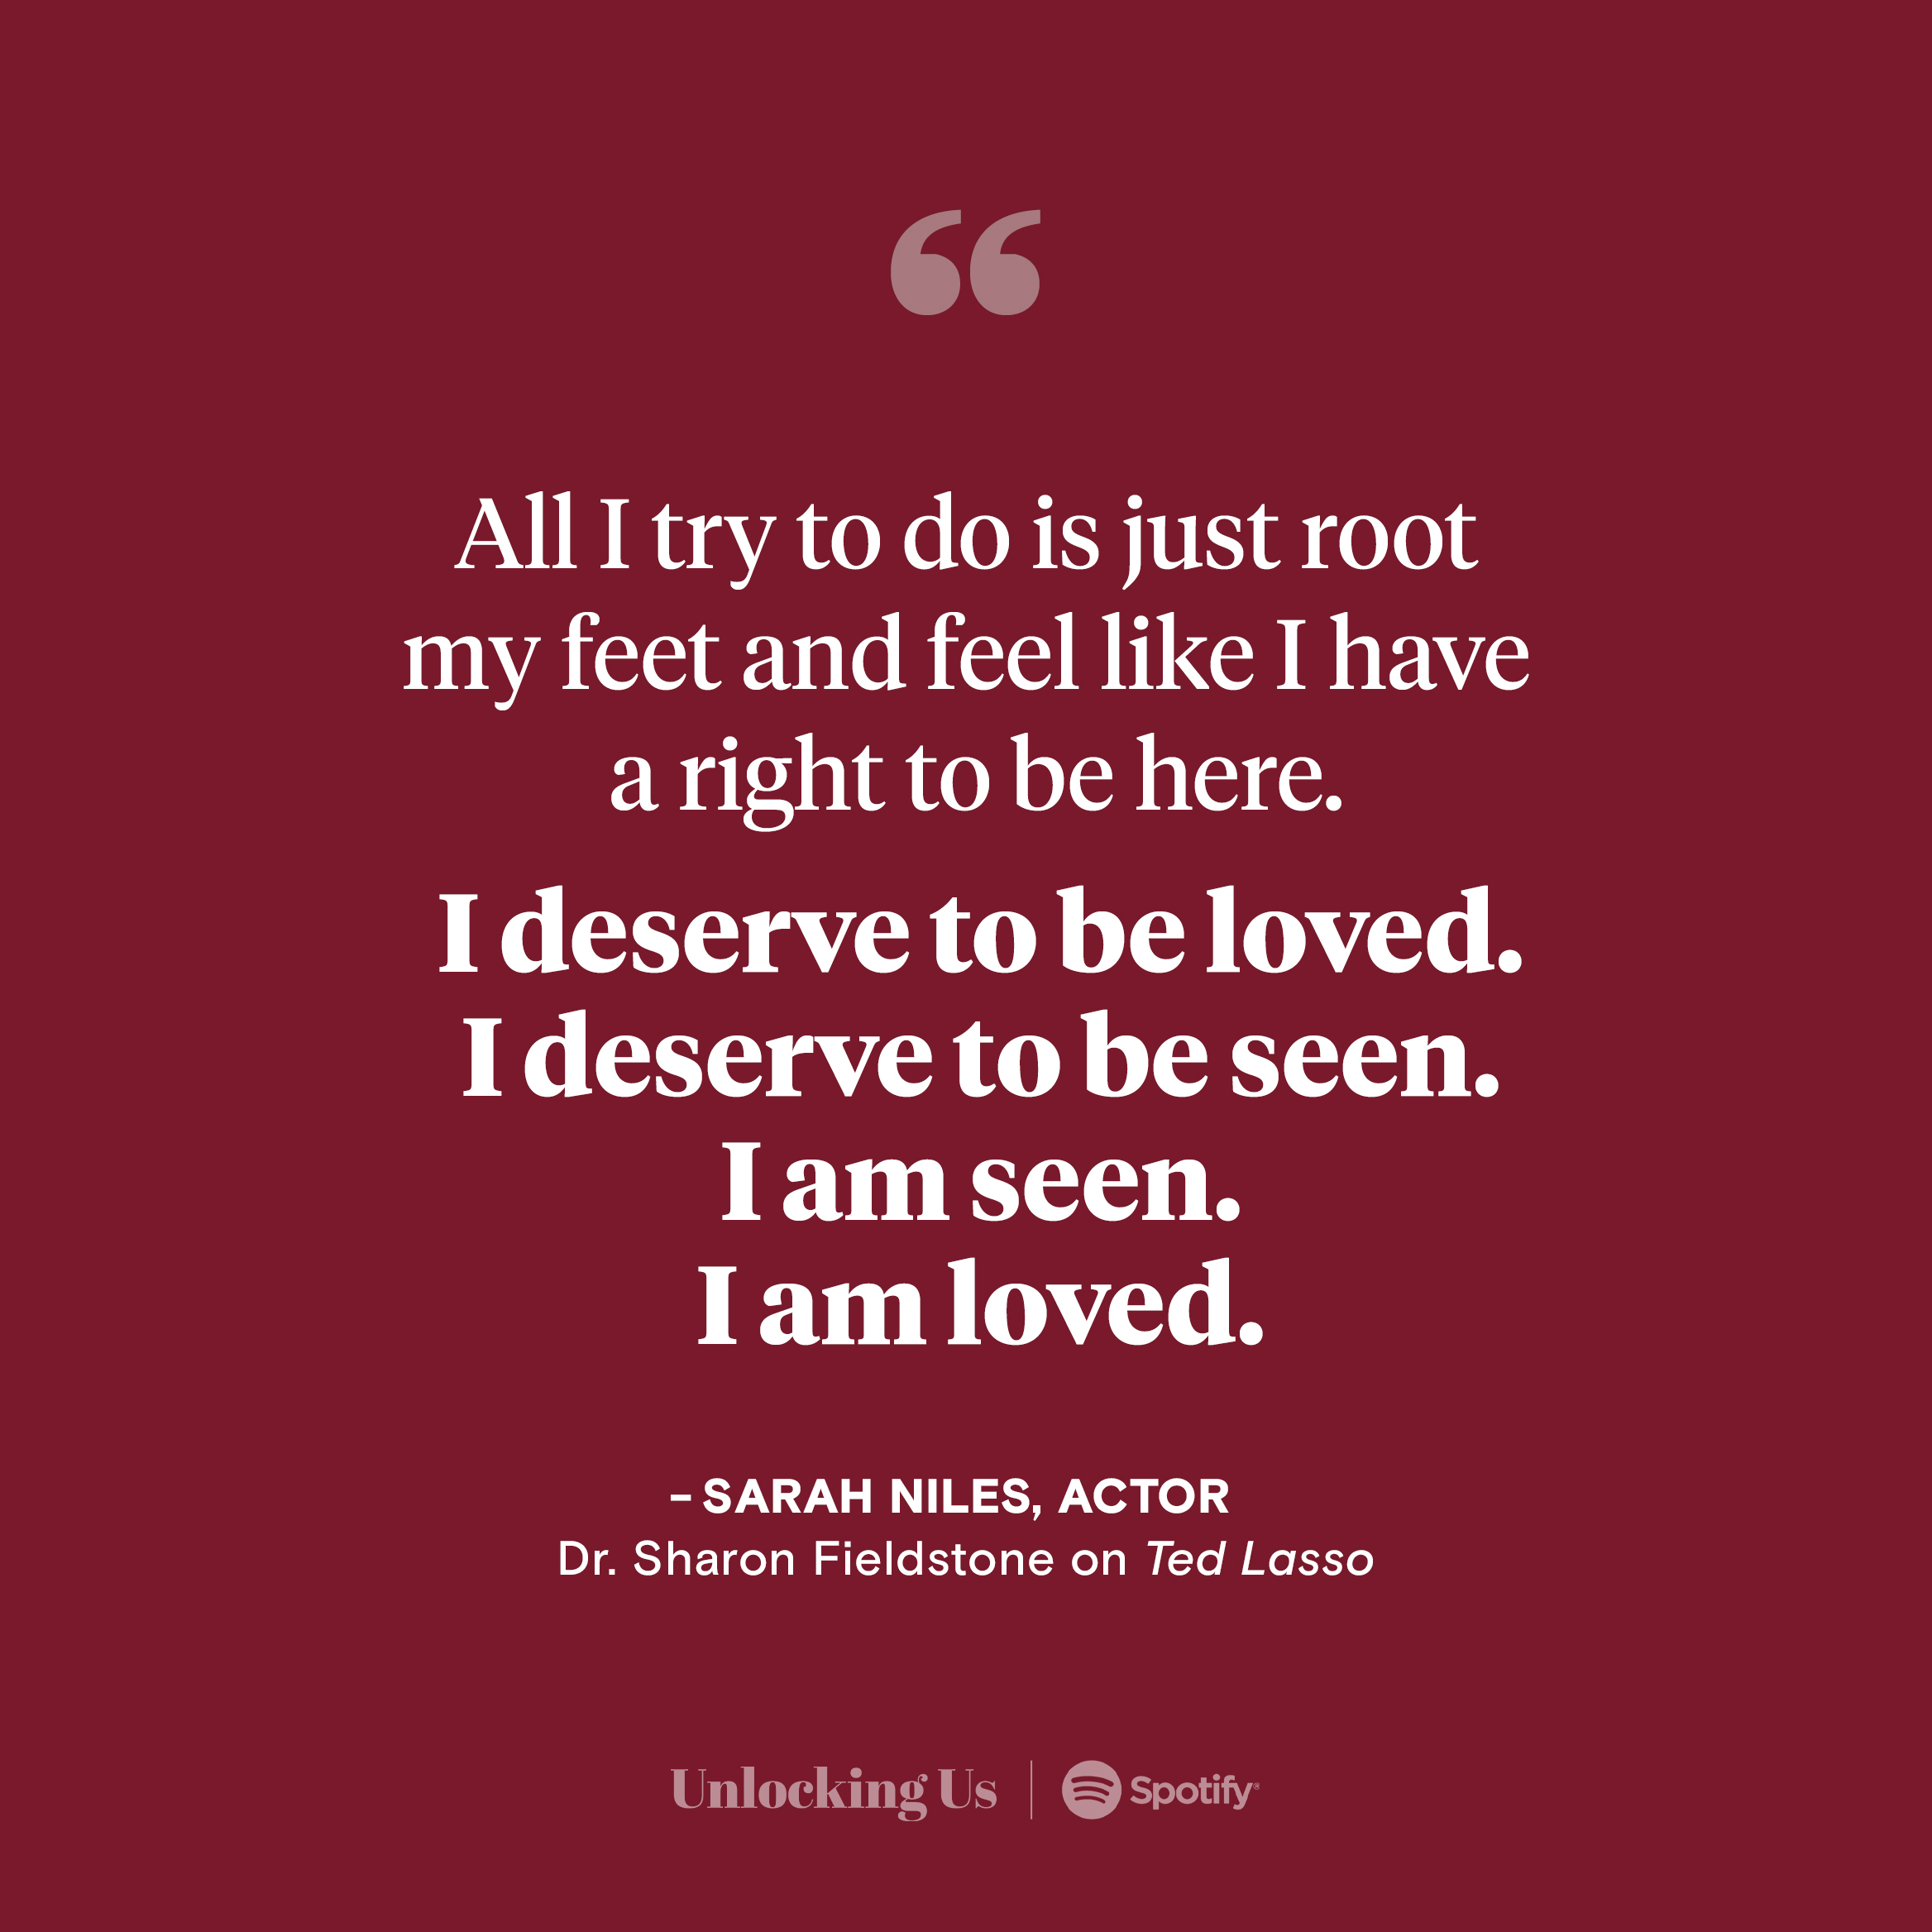 A quote from Sarah Niles on being seen and loved